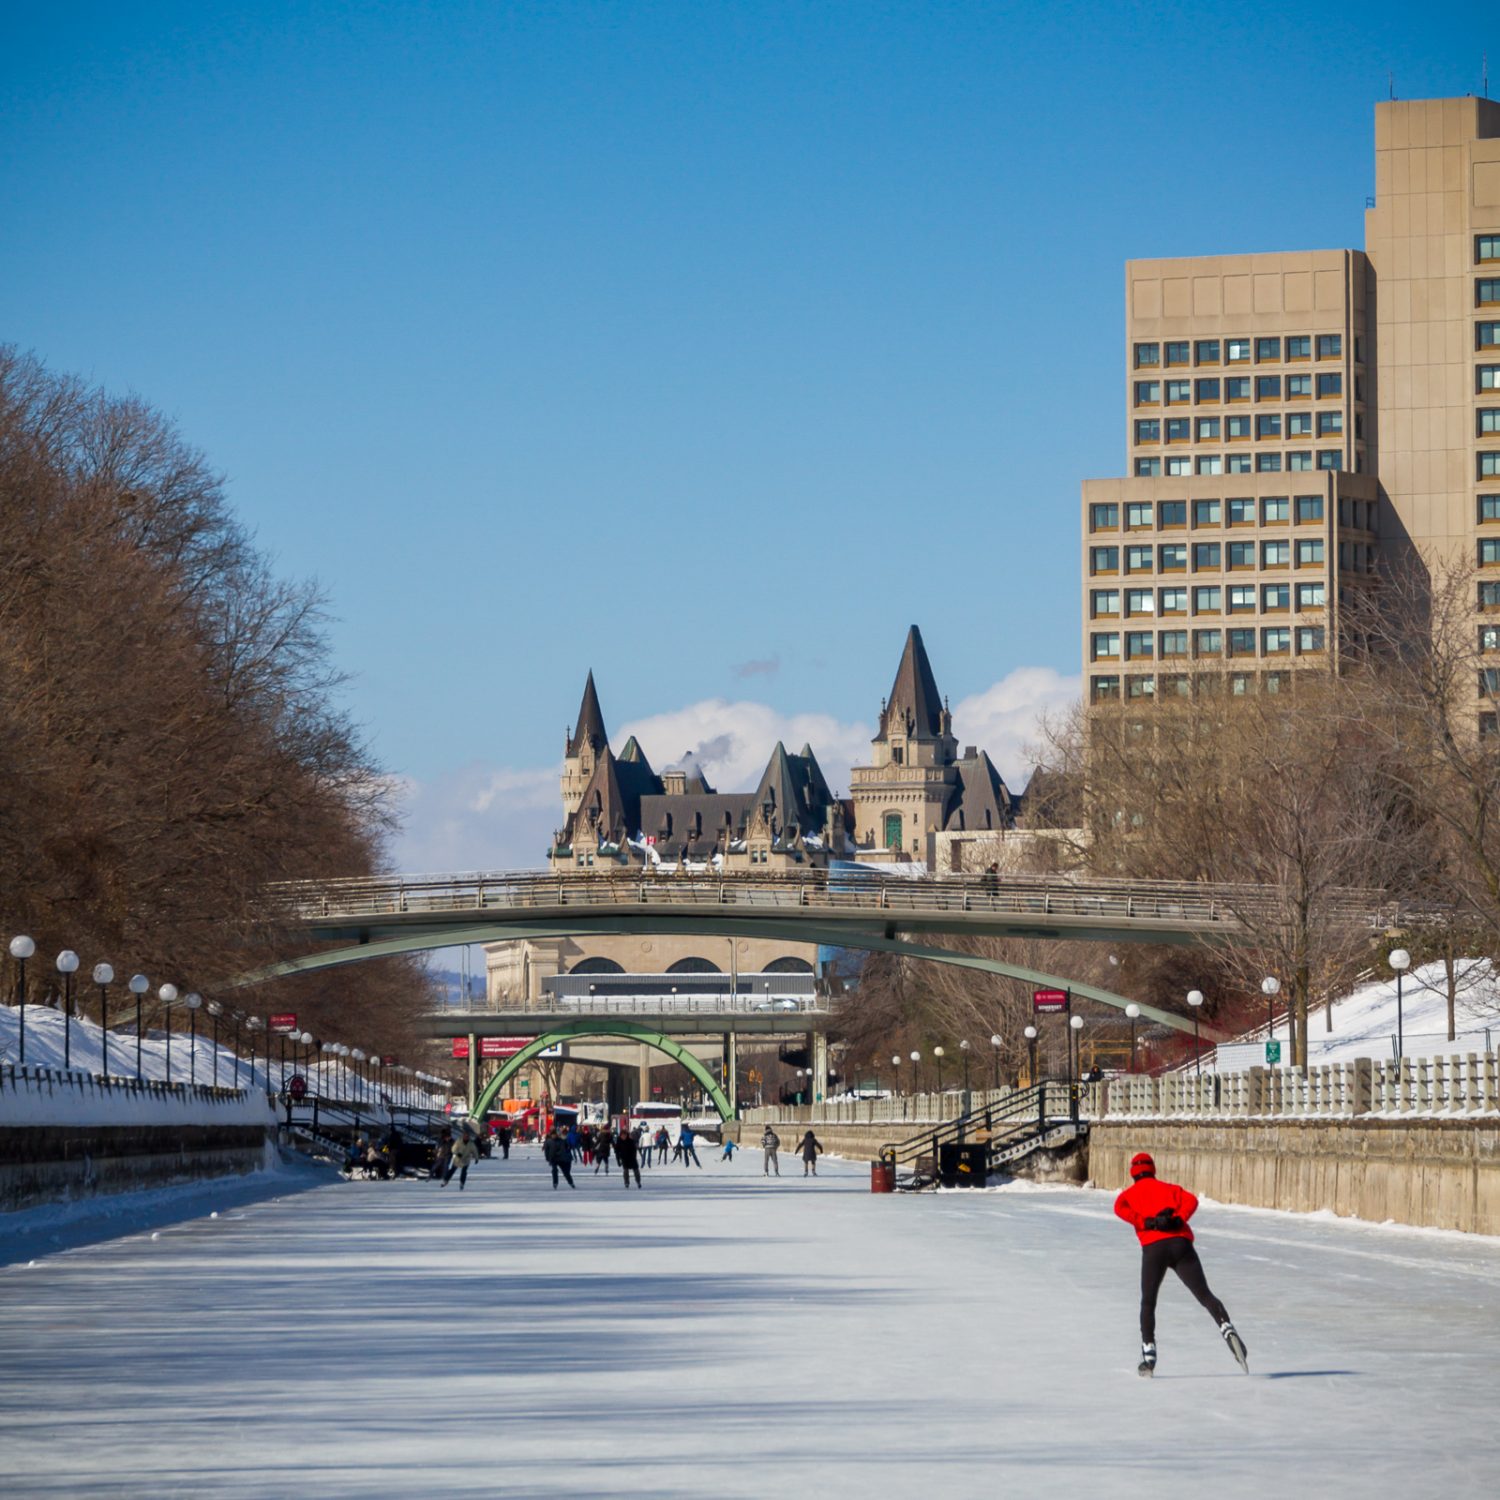 Skating on the Canal